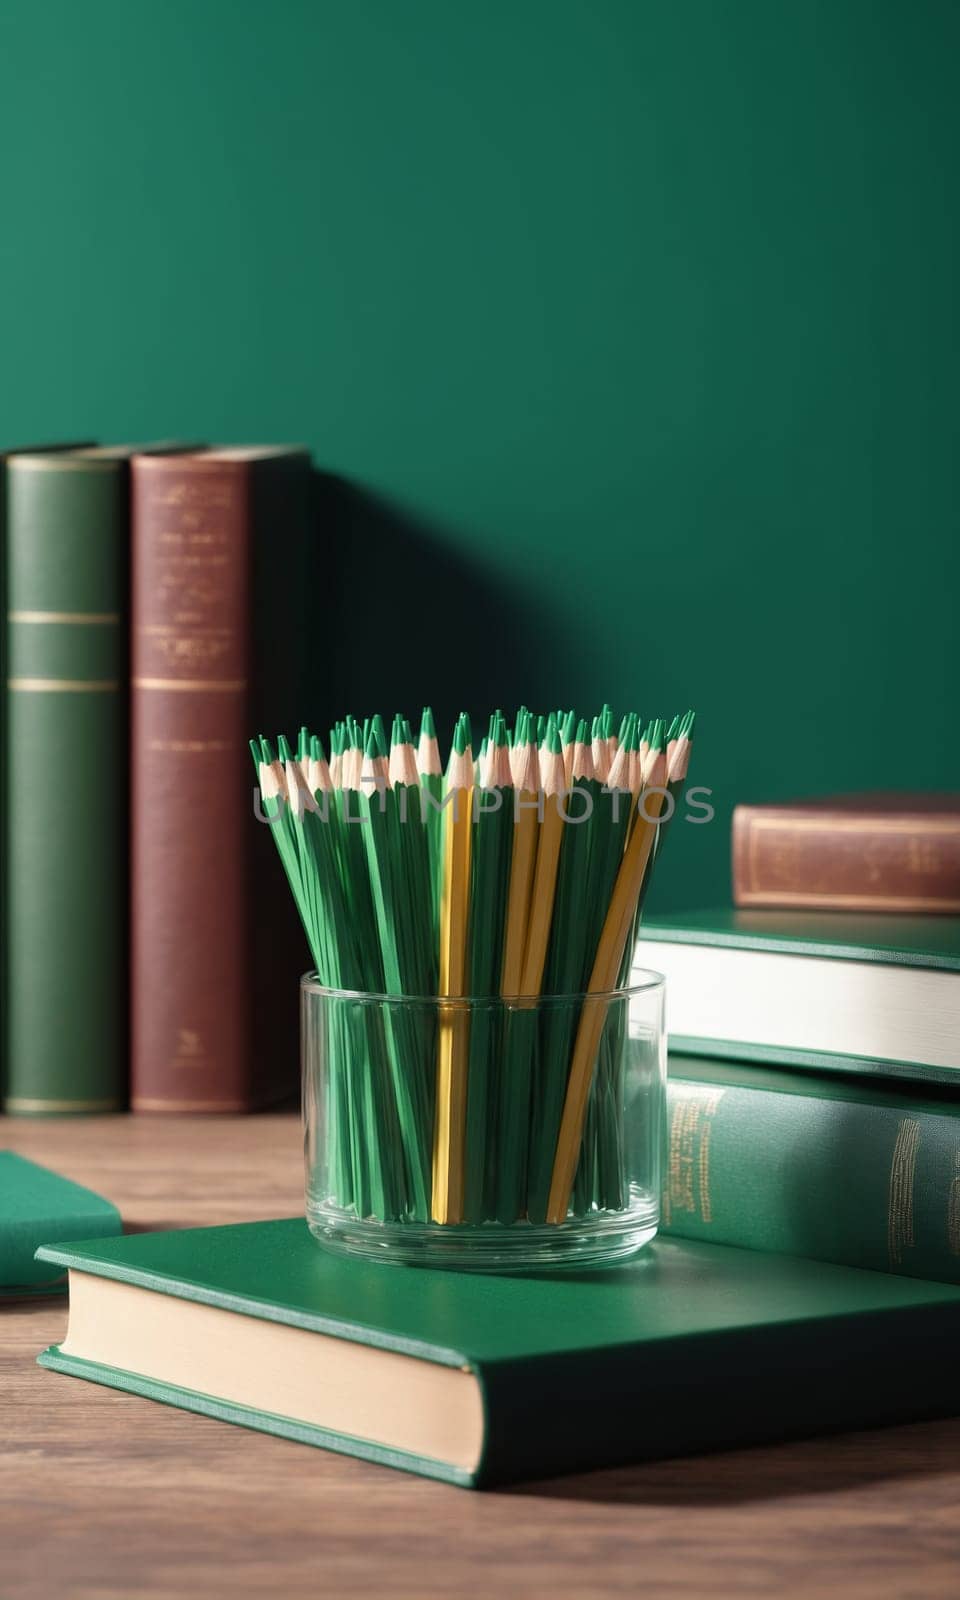 Pencils and notebooks on wooden table against green chalkboard background.